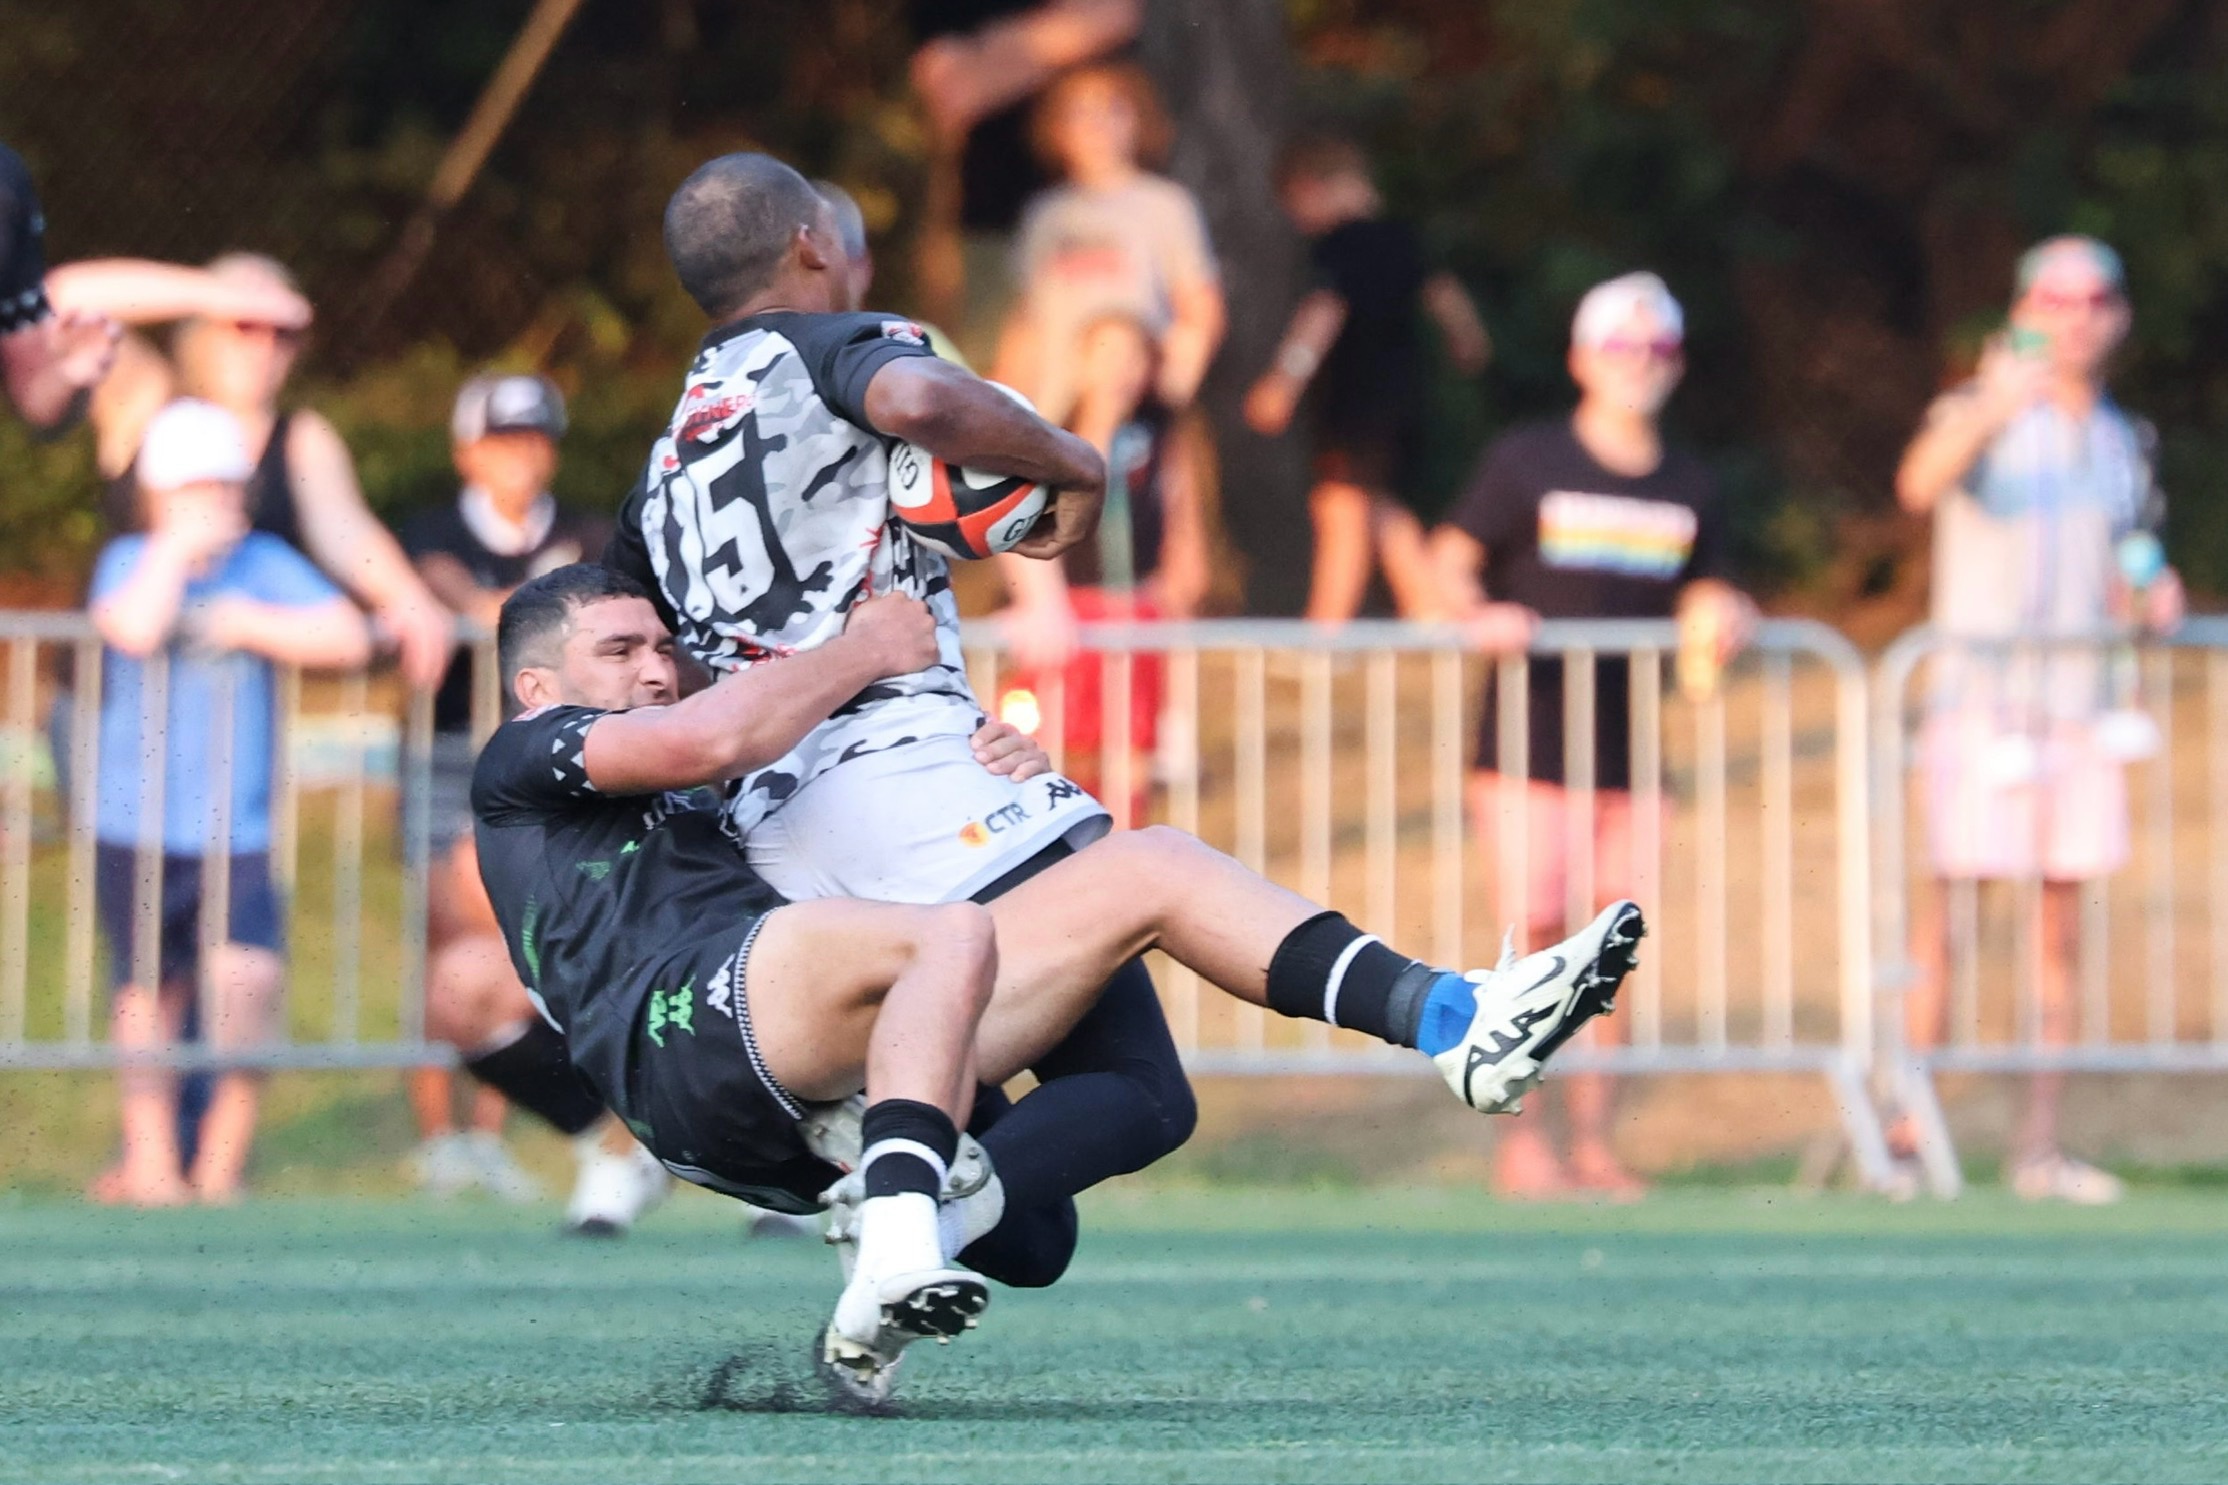 Seattle Seawolves Triumph Over San Diego Legion 30-28 to Advance to Western Conference Final!